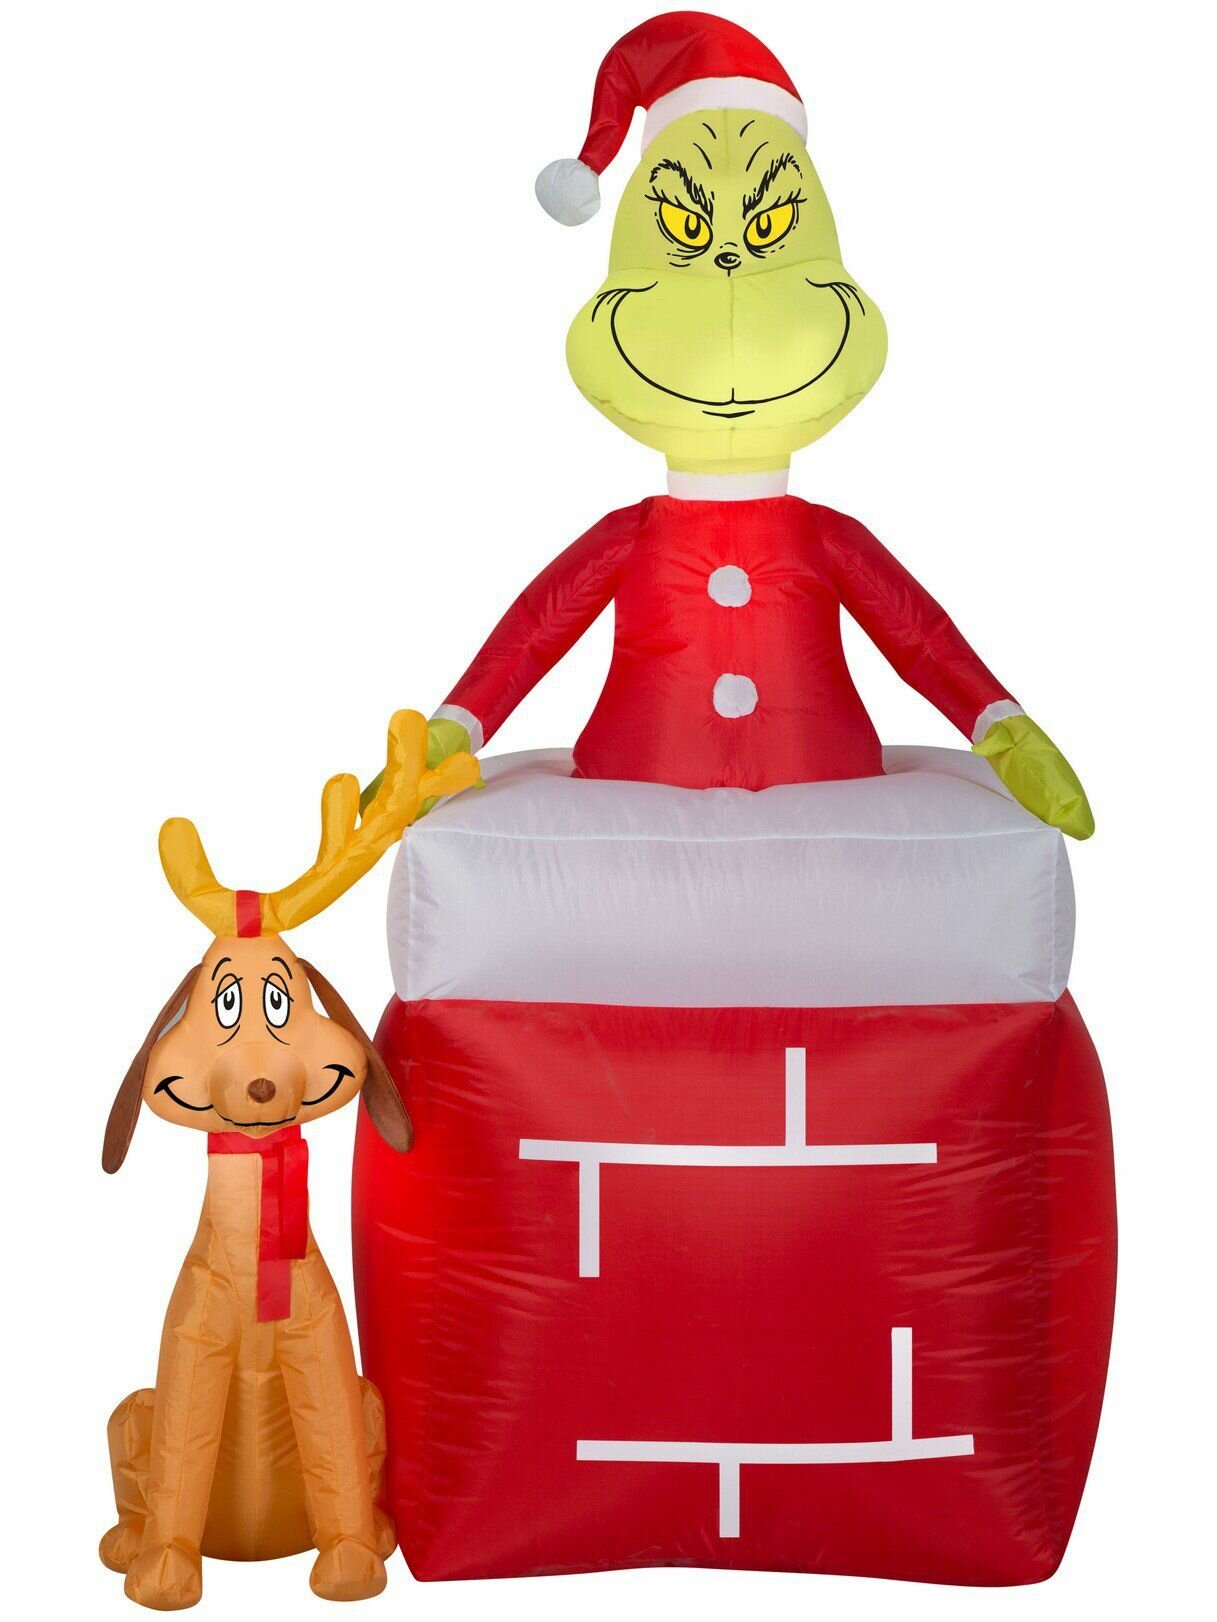 12' GIANT GRINCH & MAX ON SLEIGH Christmas Lighted Airblown Yard Inflatable